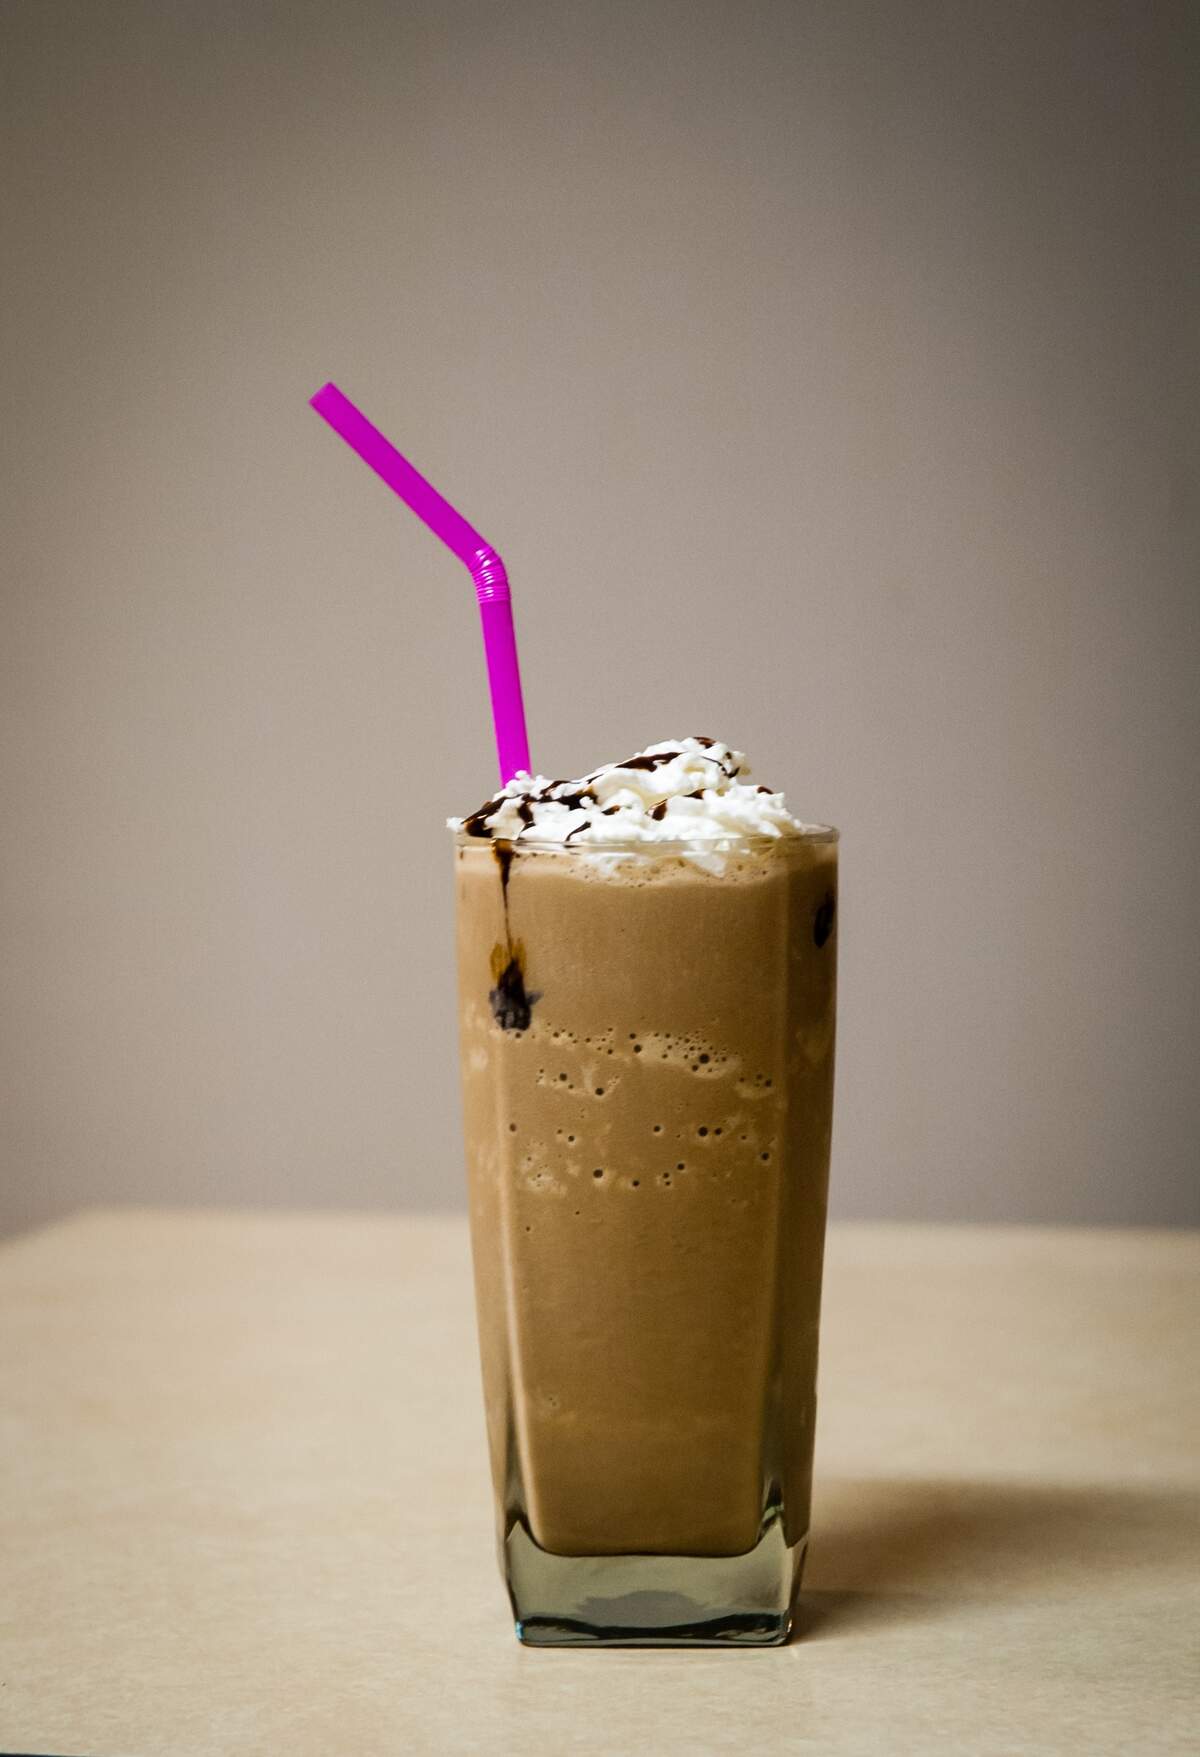 Image for National Shake Month